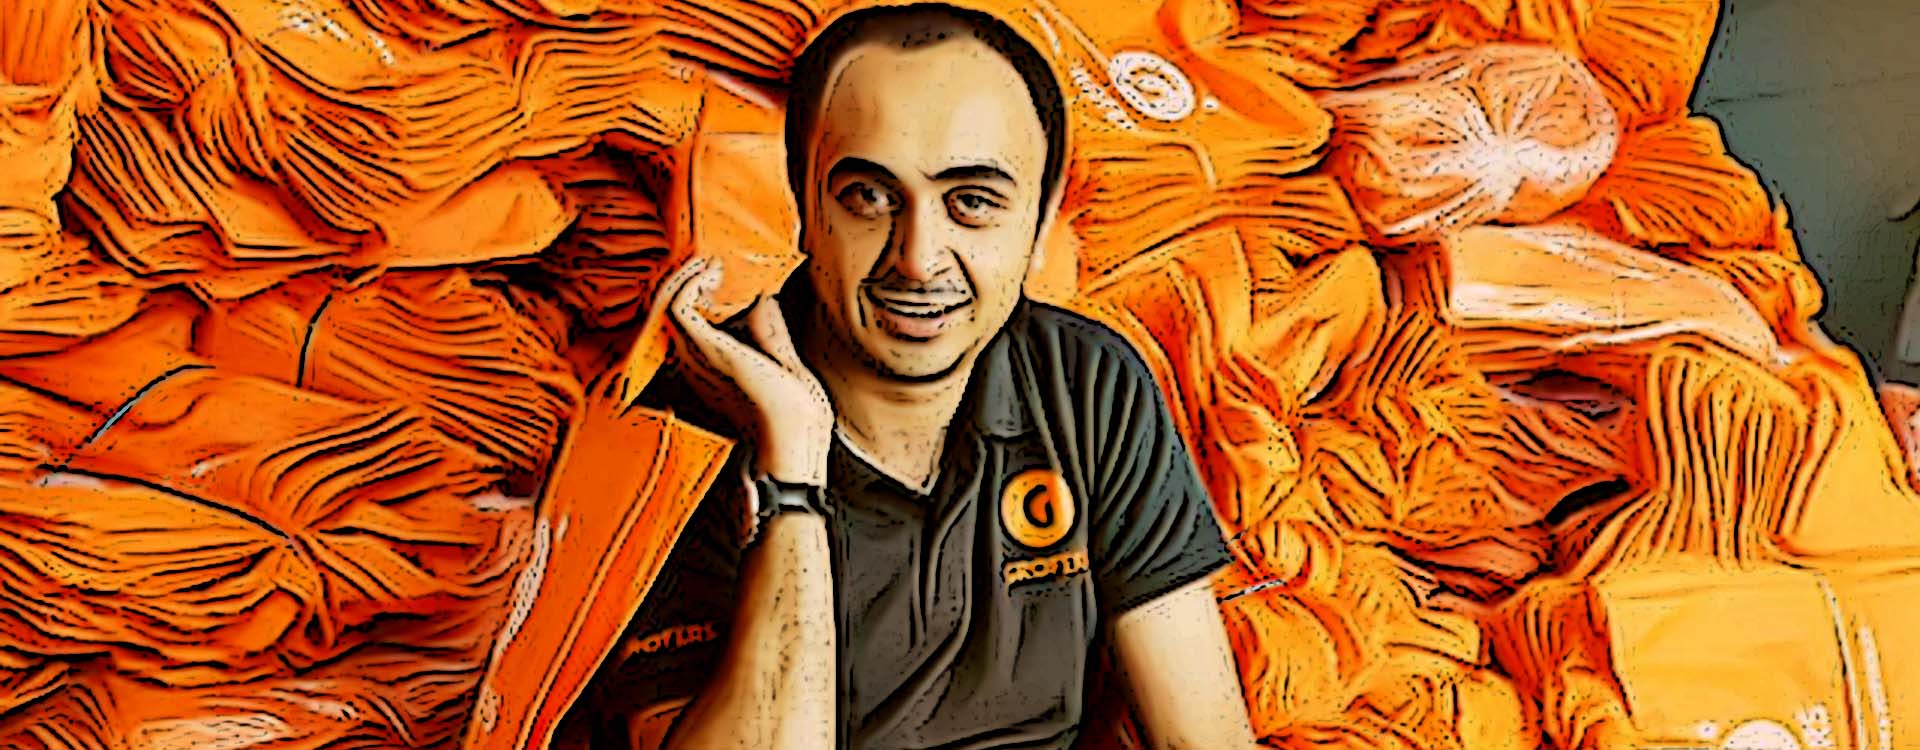 This is how Albinder Dhindsa made Grofers one of the most successful e-retail startups.